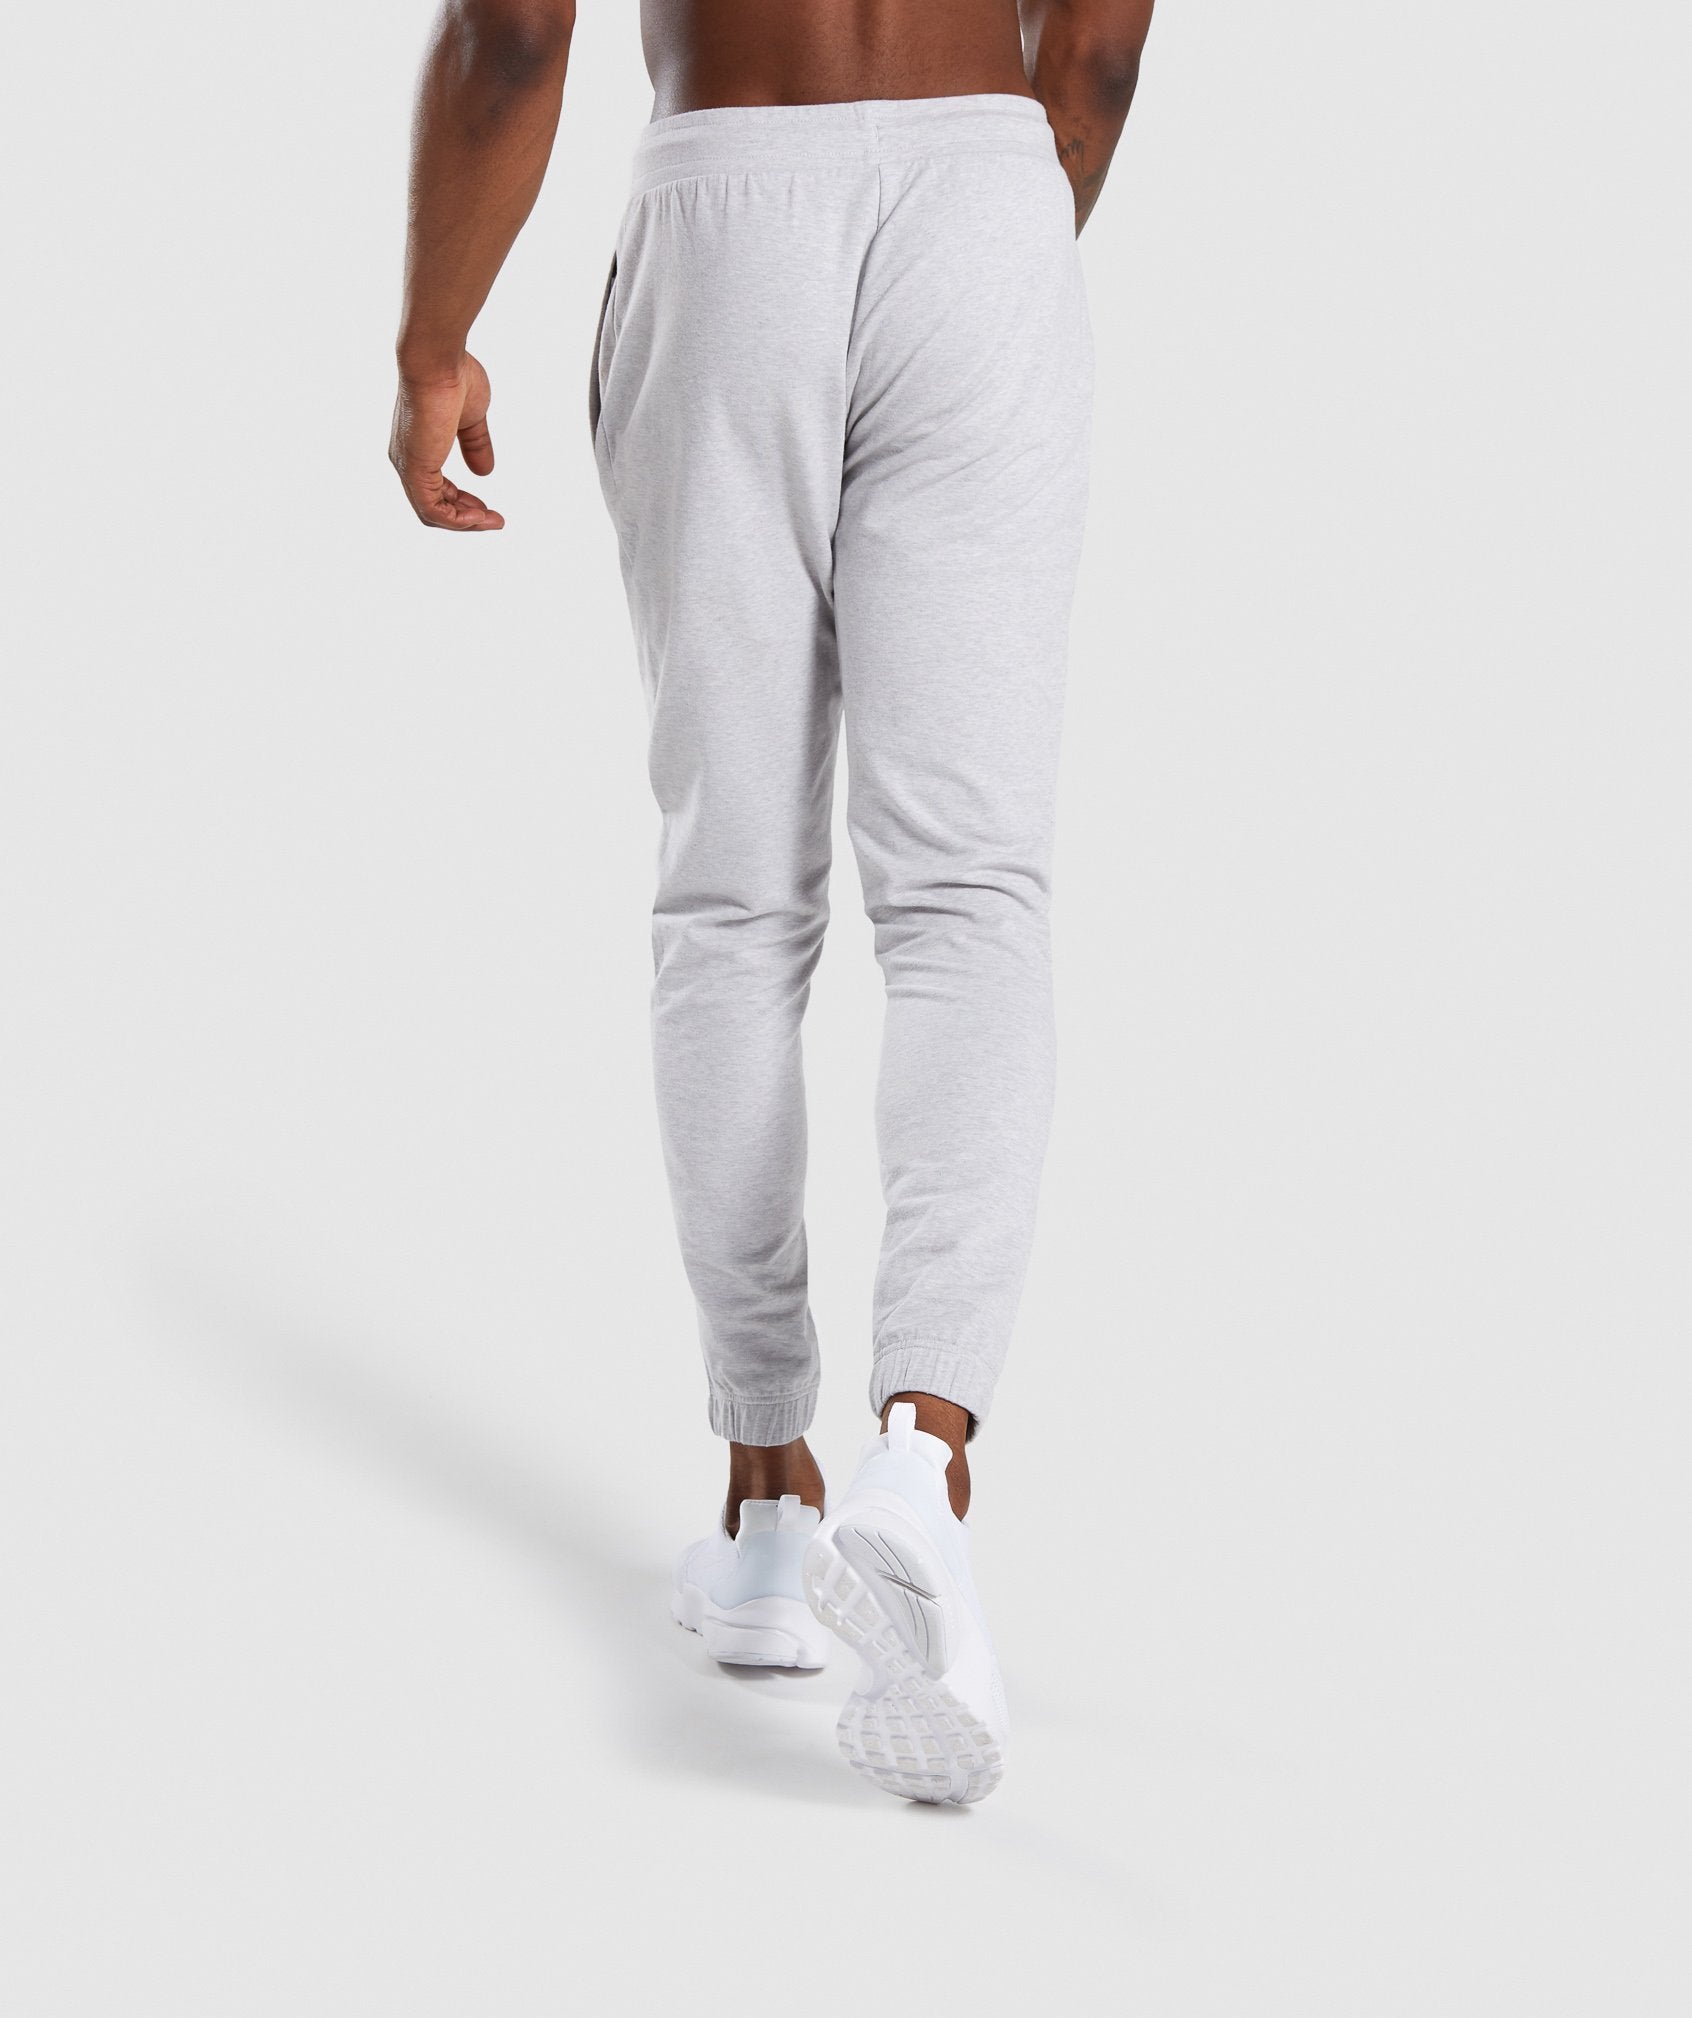 Bold Joggers in Light Grey - view 2